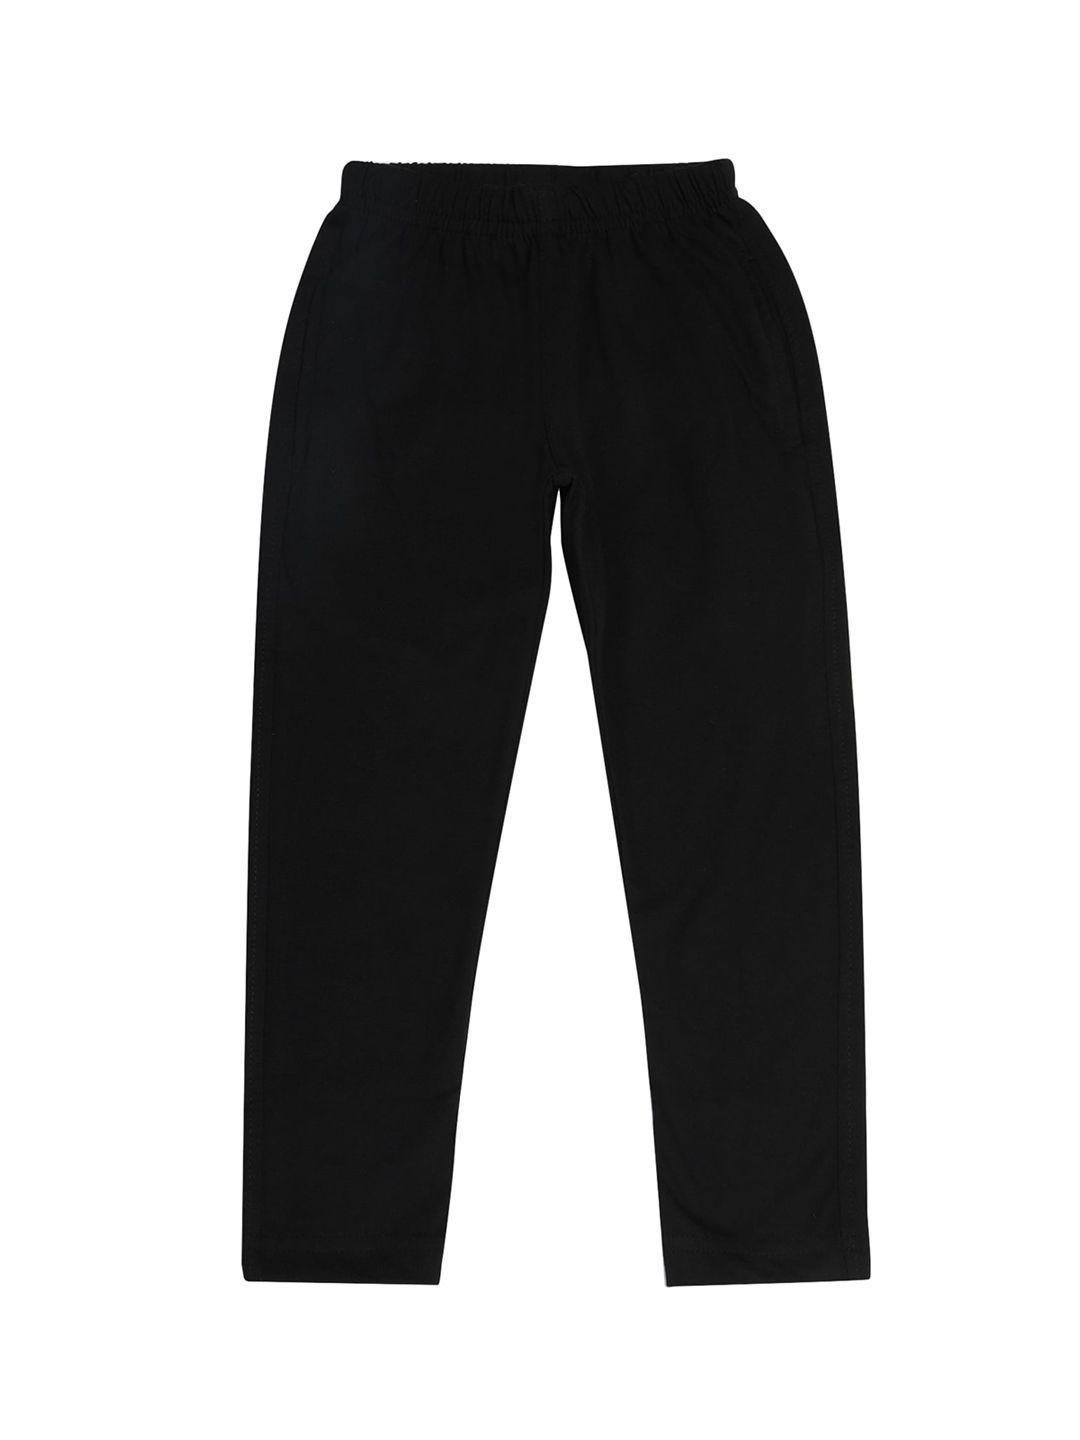 dyca boys black solid regular fit mid rise cotton track pant